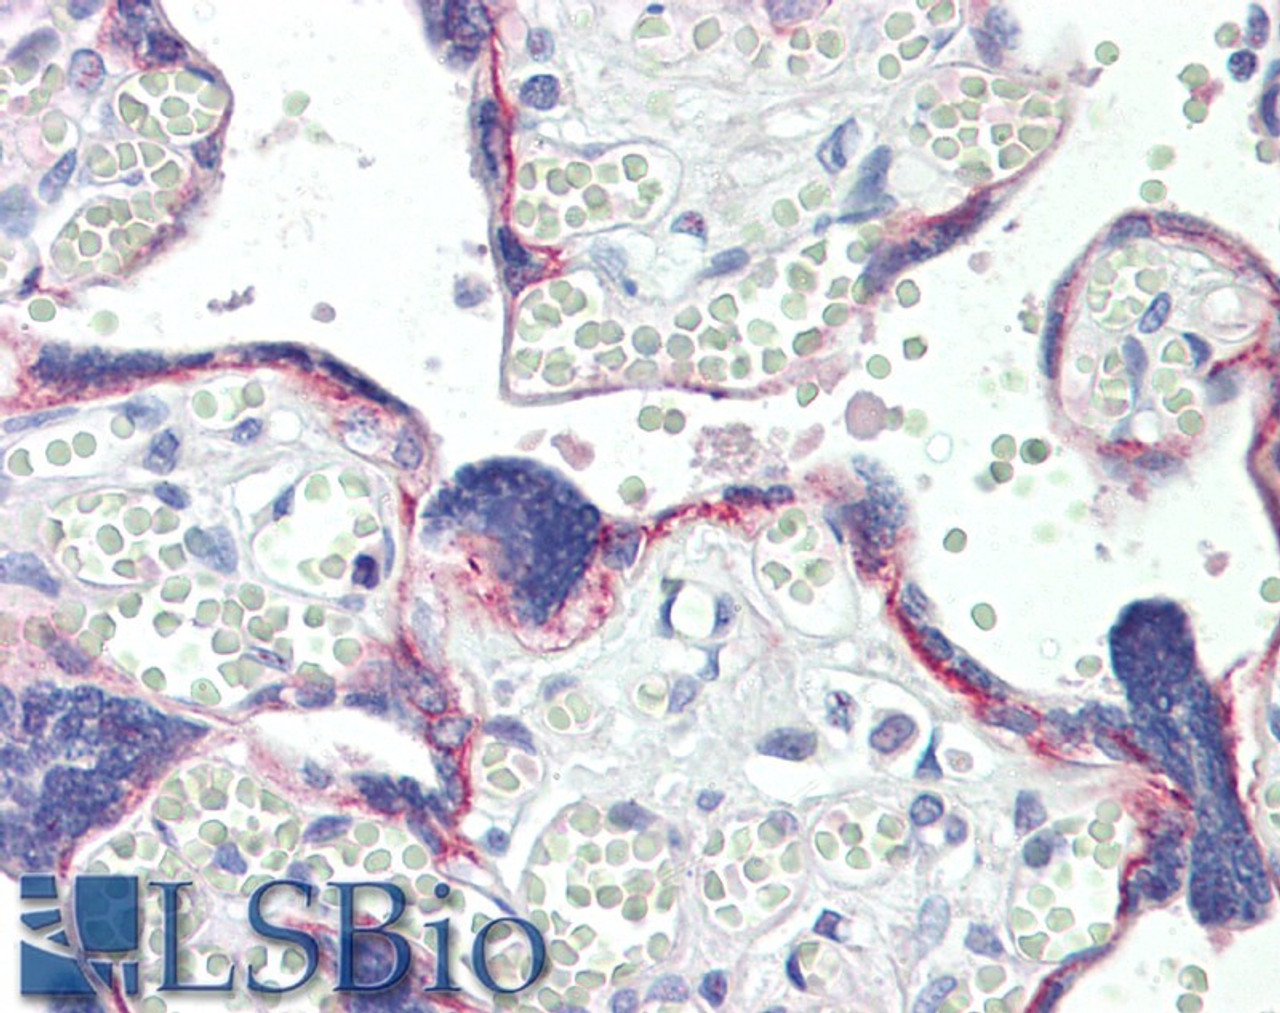 42-547 (5ug/ml) staining of paraffin embedded Human Kidney. Steamed antigen retrieval with citrate buffer pH 6, AP-staining.